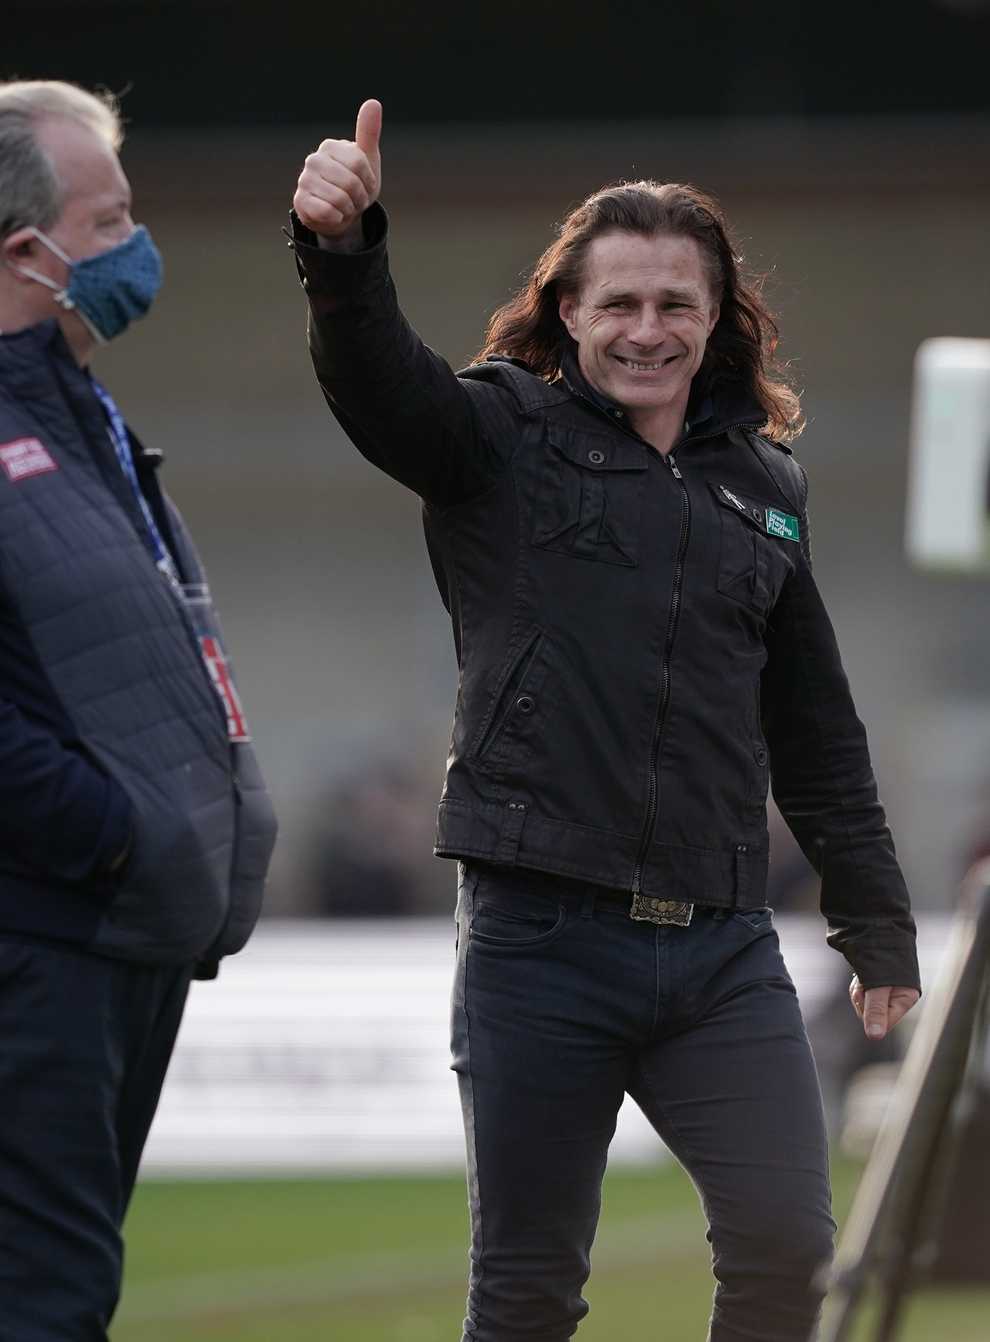 Wycombe Wanderers manager Gareth Ainsworth gives a thumbs up after the draw with Rotherham (PA)